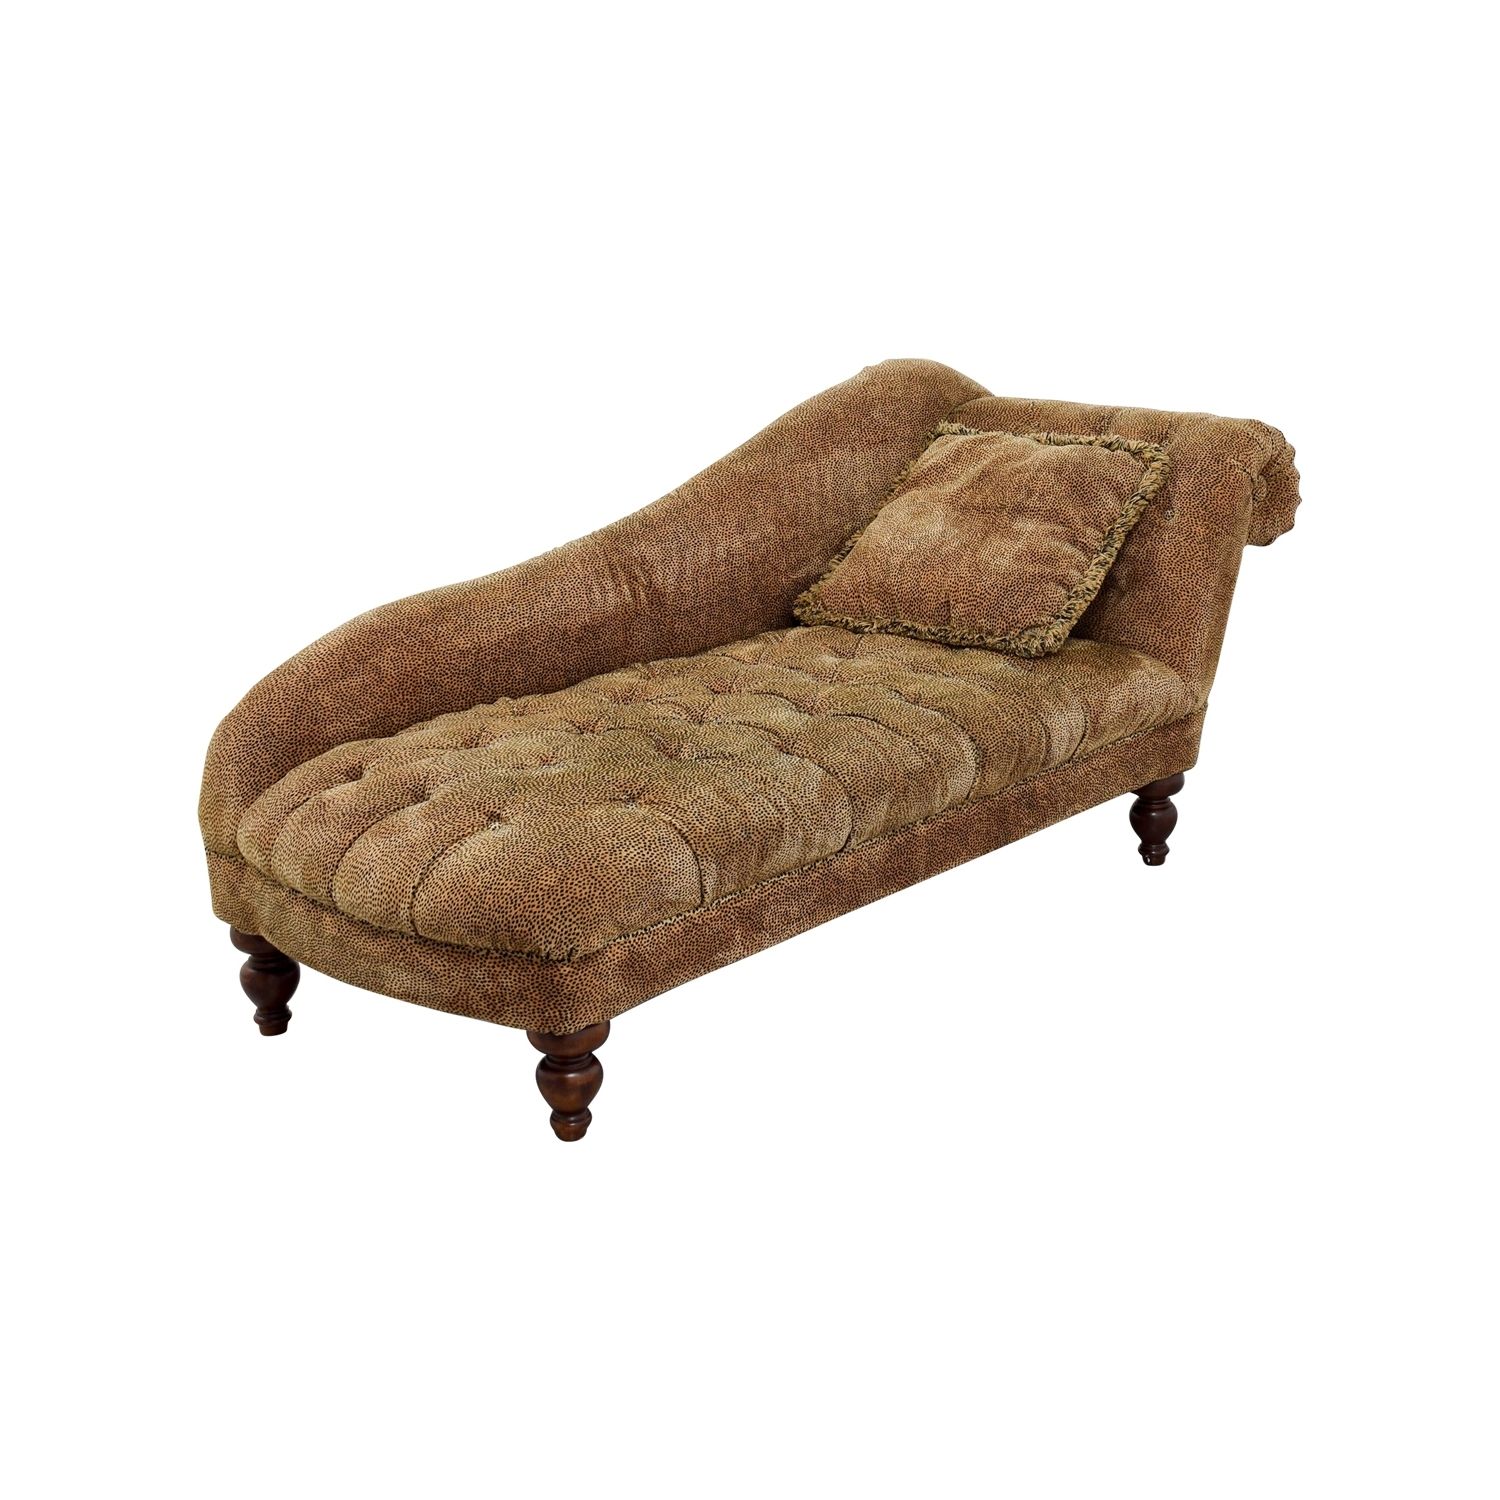 [%73% Off – Domain Home Furnishings Domain Home Furnishings Leopard Intended For Well Liked Leopard Chaises|leopard Chaises Throughout Current 73% Off – Domain Home Furnishings Domain Home Furnishings Leopard|2018 Leopard Chaises In 73% Off – Domain Home Furnishings Domain Home Furnishings Leopard|2017 73% Off – Domain Home Furnishings Domain Home Furnishings Leopard With Regard To Leopard Chaises%] (Photo 3 of 15)